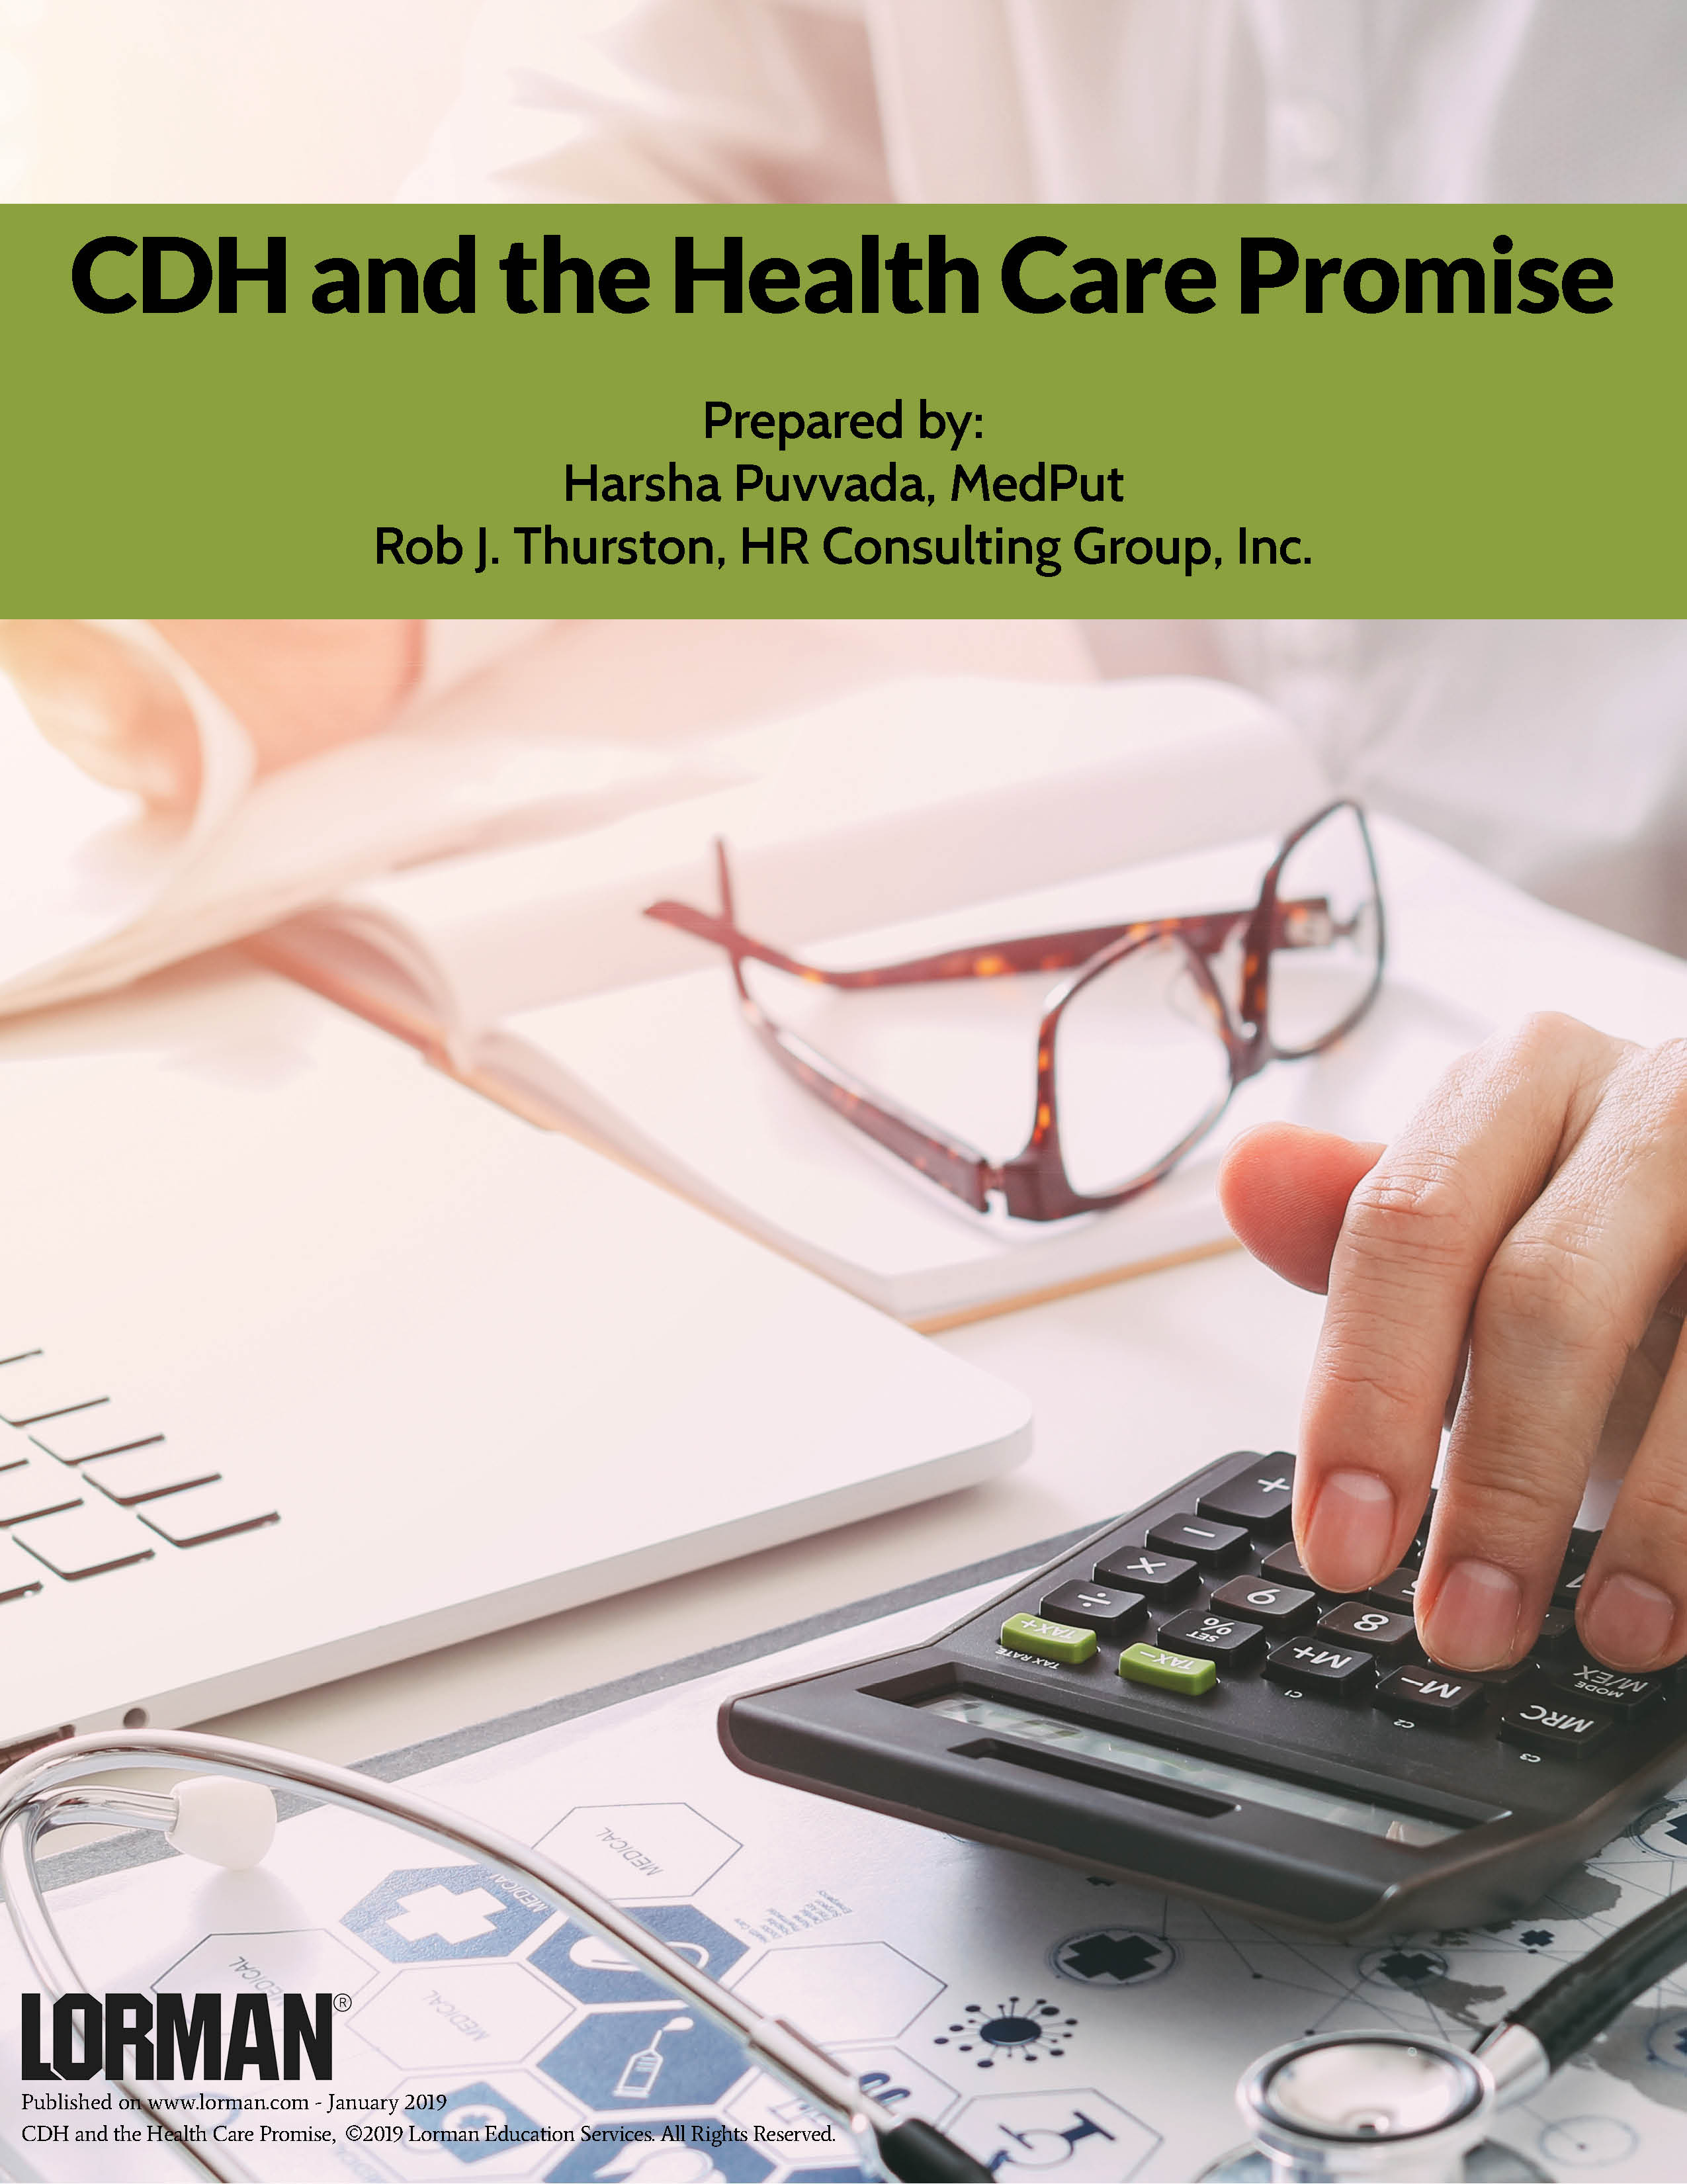 CDH and the Health Care Promise